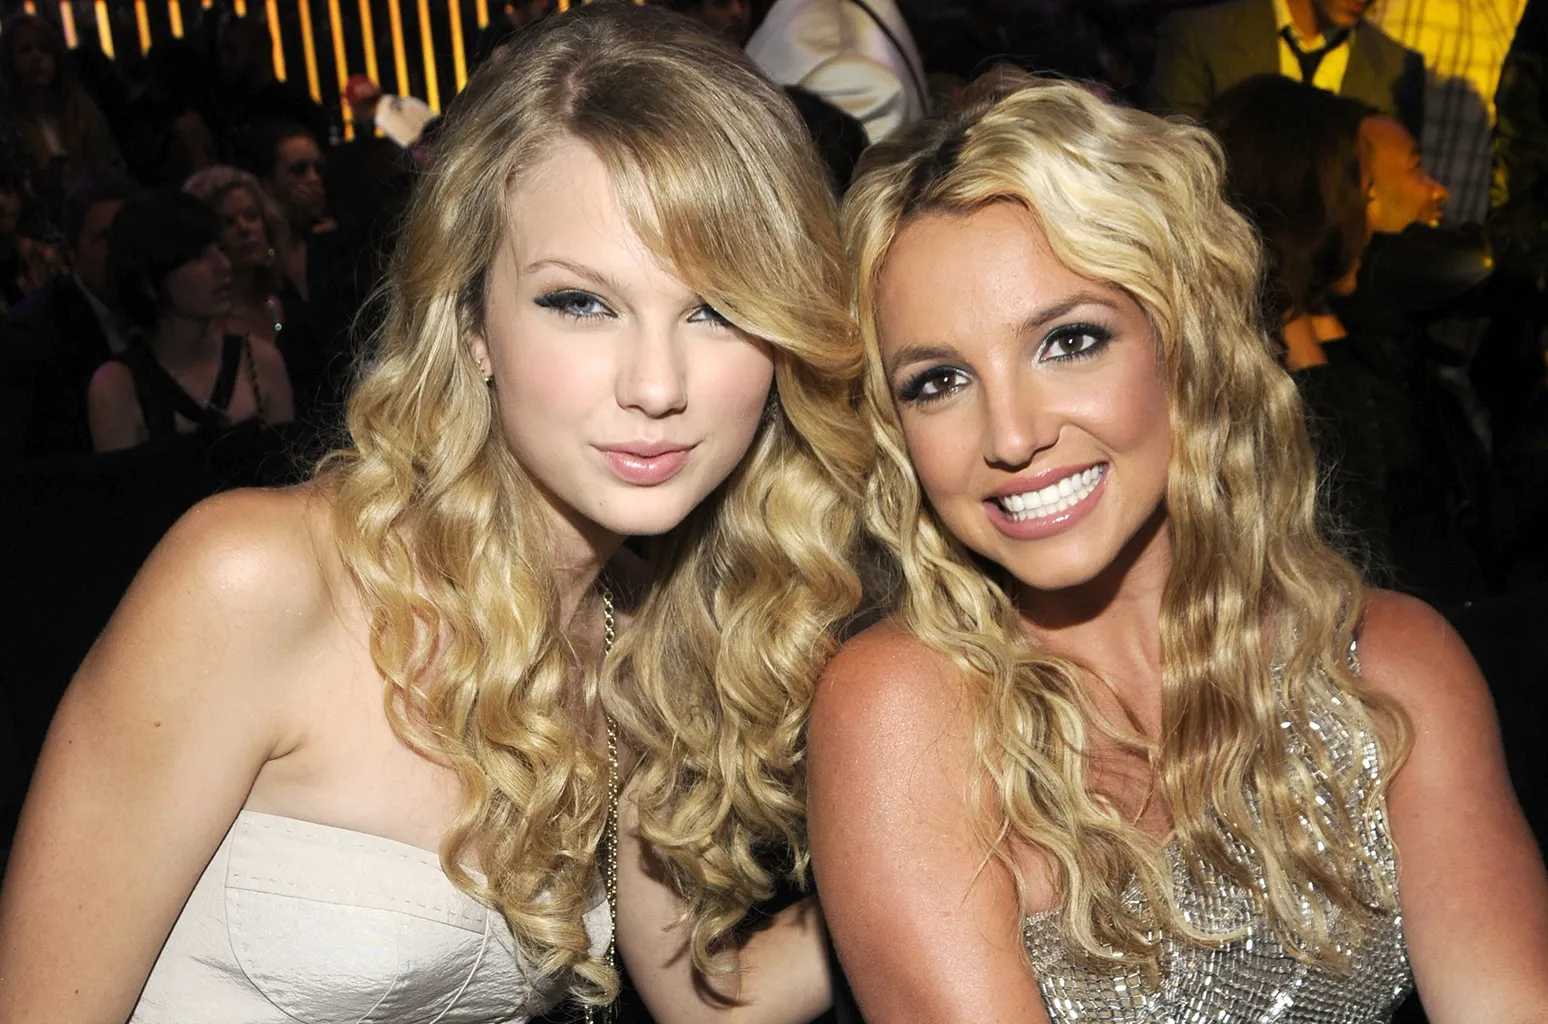 Britney Spears and Taylor Swift (Source: Billboard)